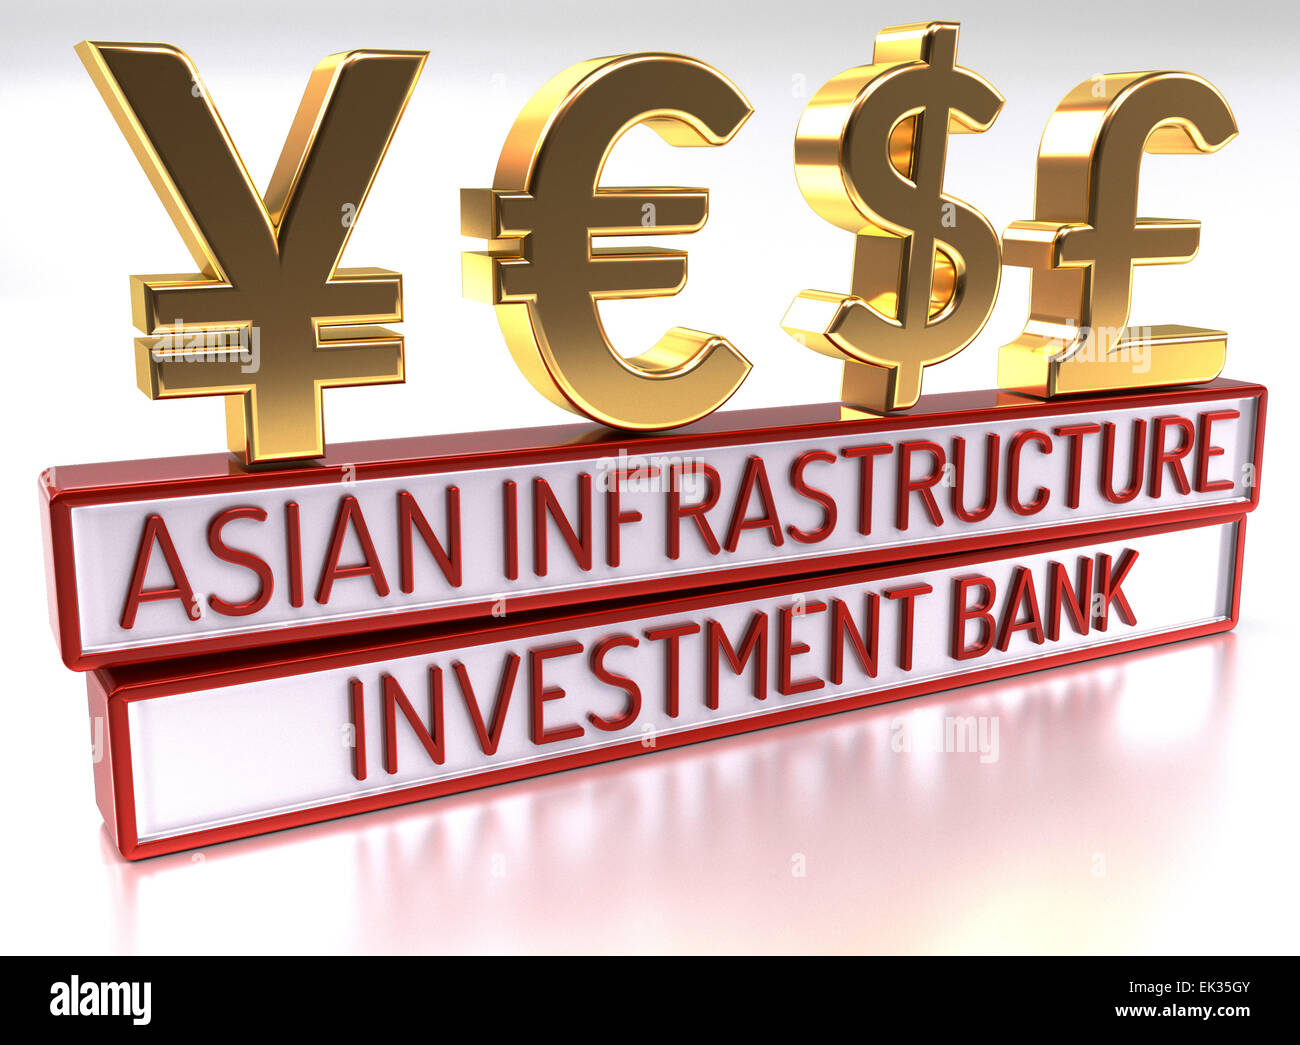 AIIB - The Asian Infrastructure Investment Bank - 3D Render Stock Photo